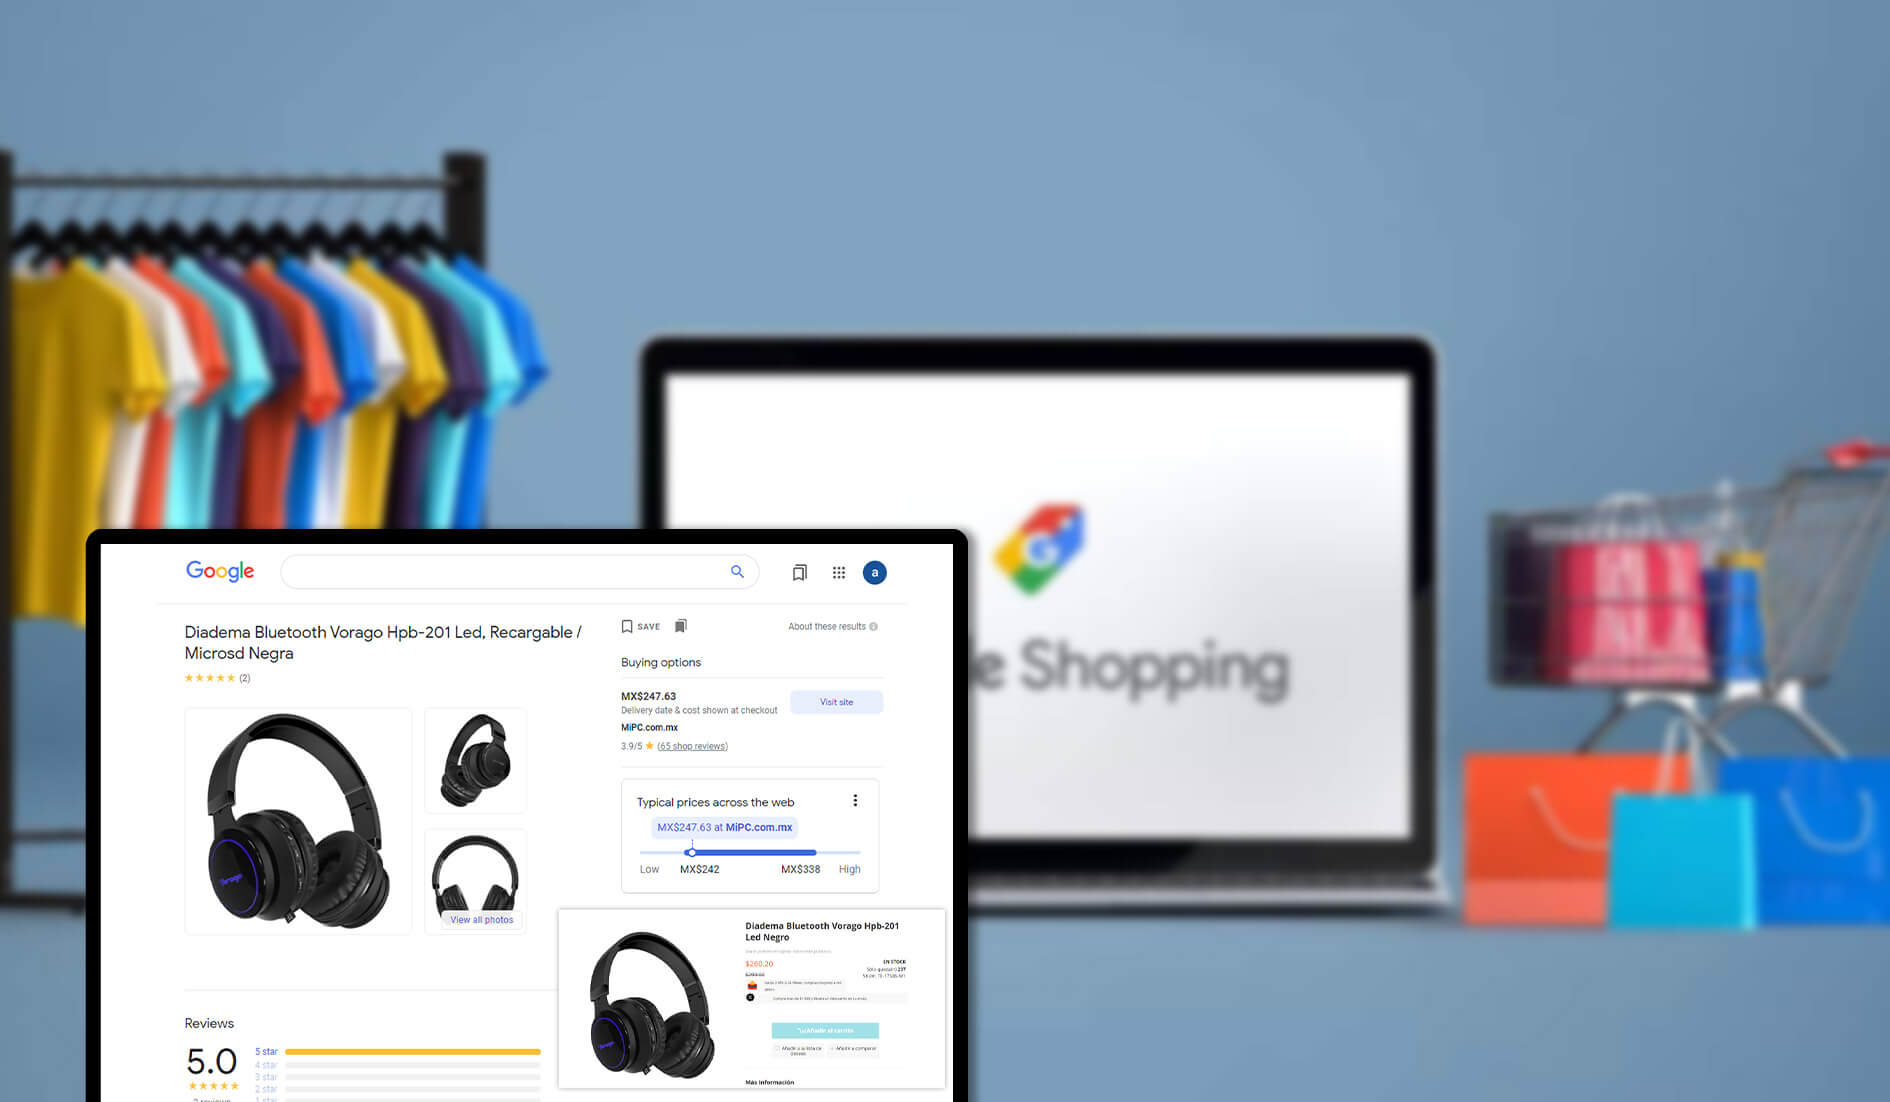 Google-Shopping-Product-Pricing,-Information,-and-Image-Scraping-Services.jpg